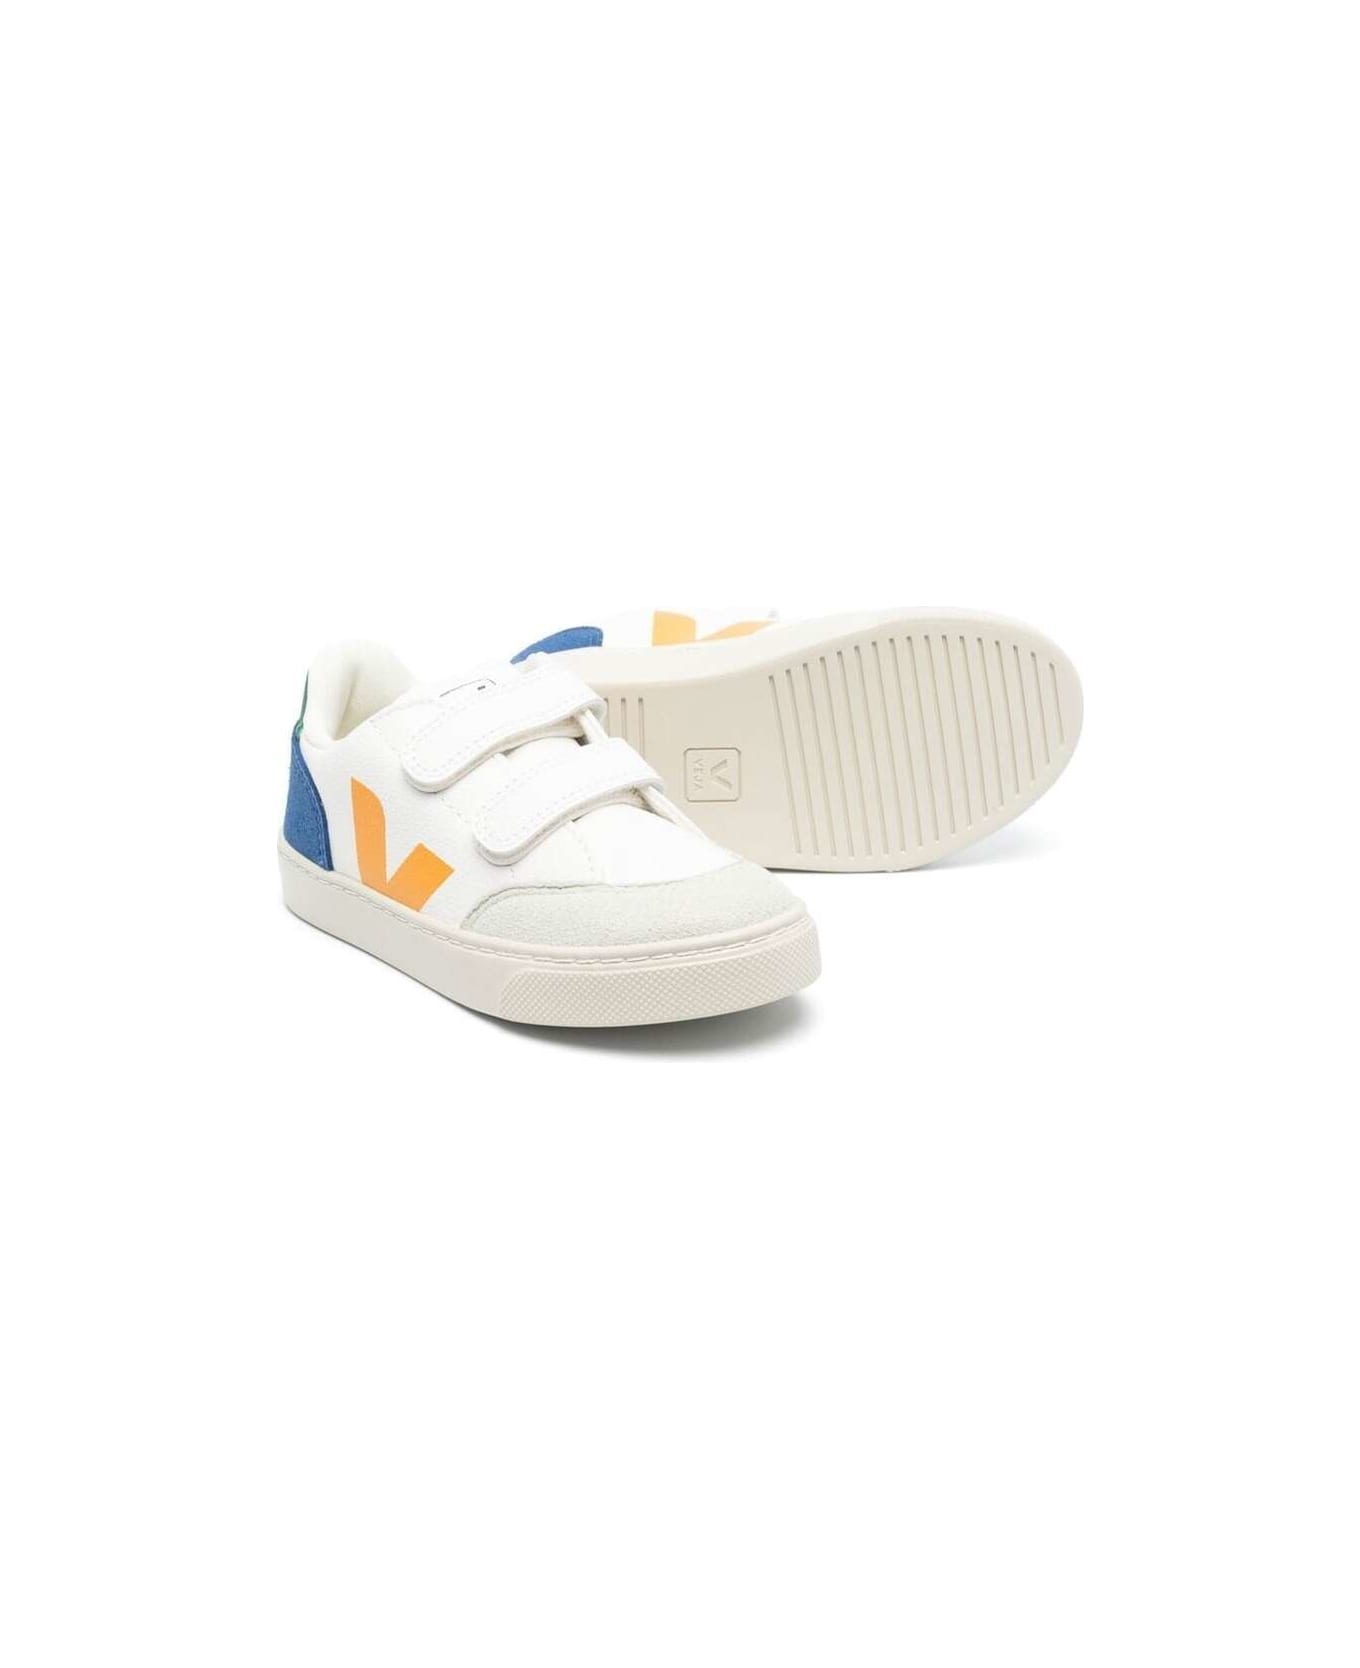 Veja White Sneakers V-12 With Touch Strap In White Leather Kids - Multicolor シューズ